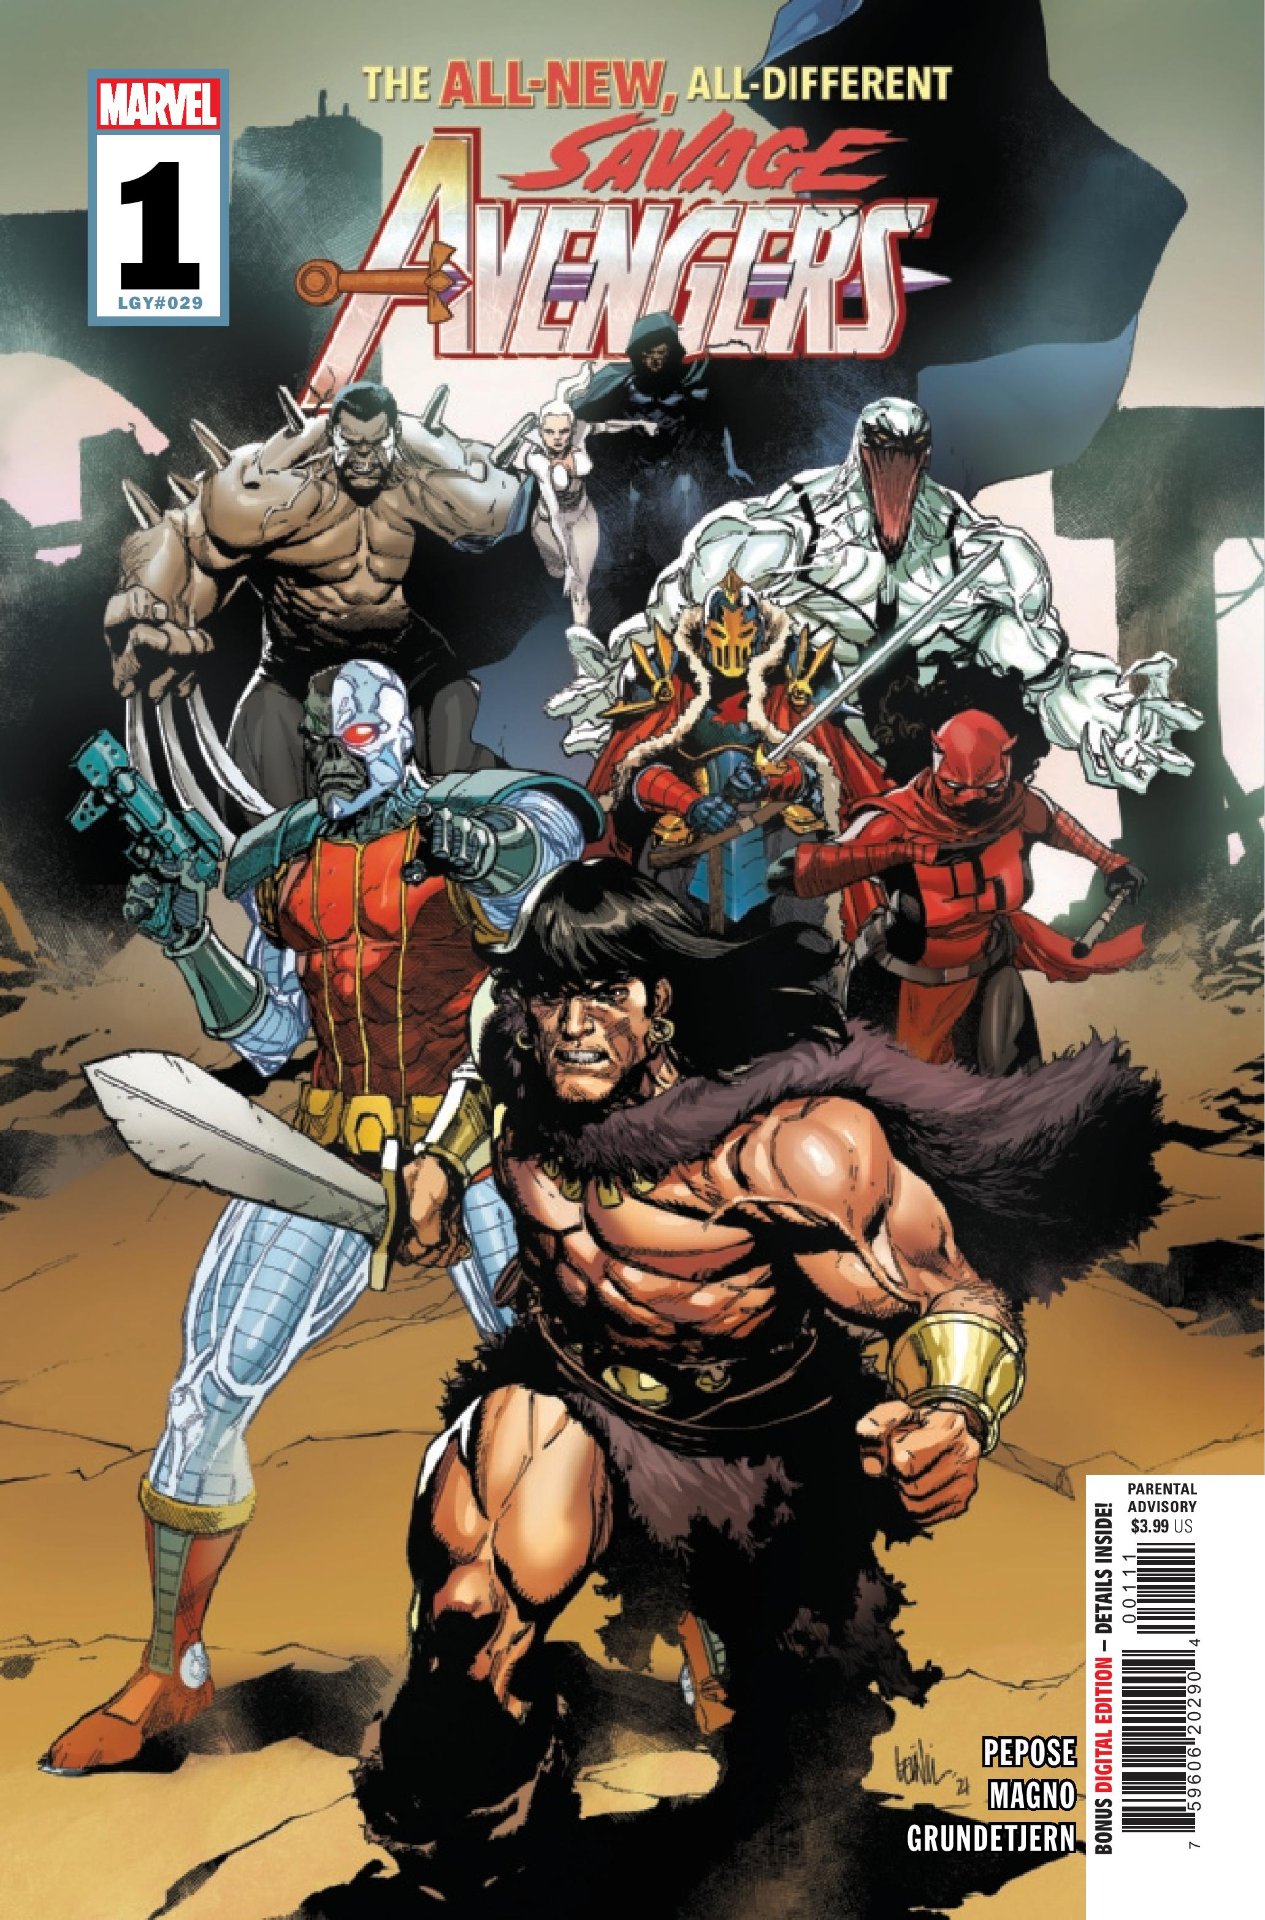 Savage Avengers #1 first impressions: The comic book equivalent of a pyrotechnics show”